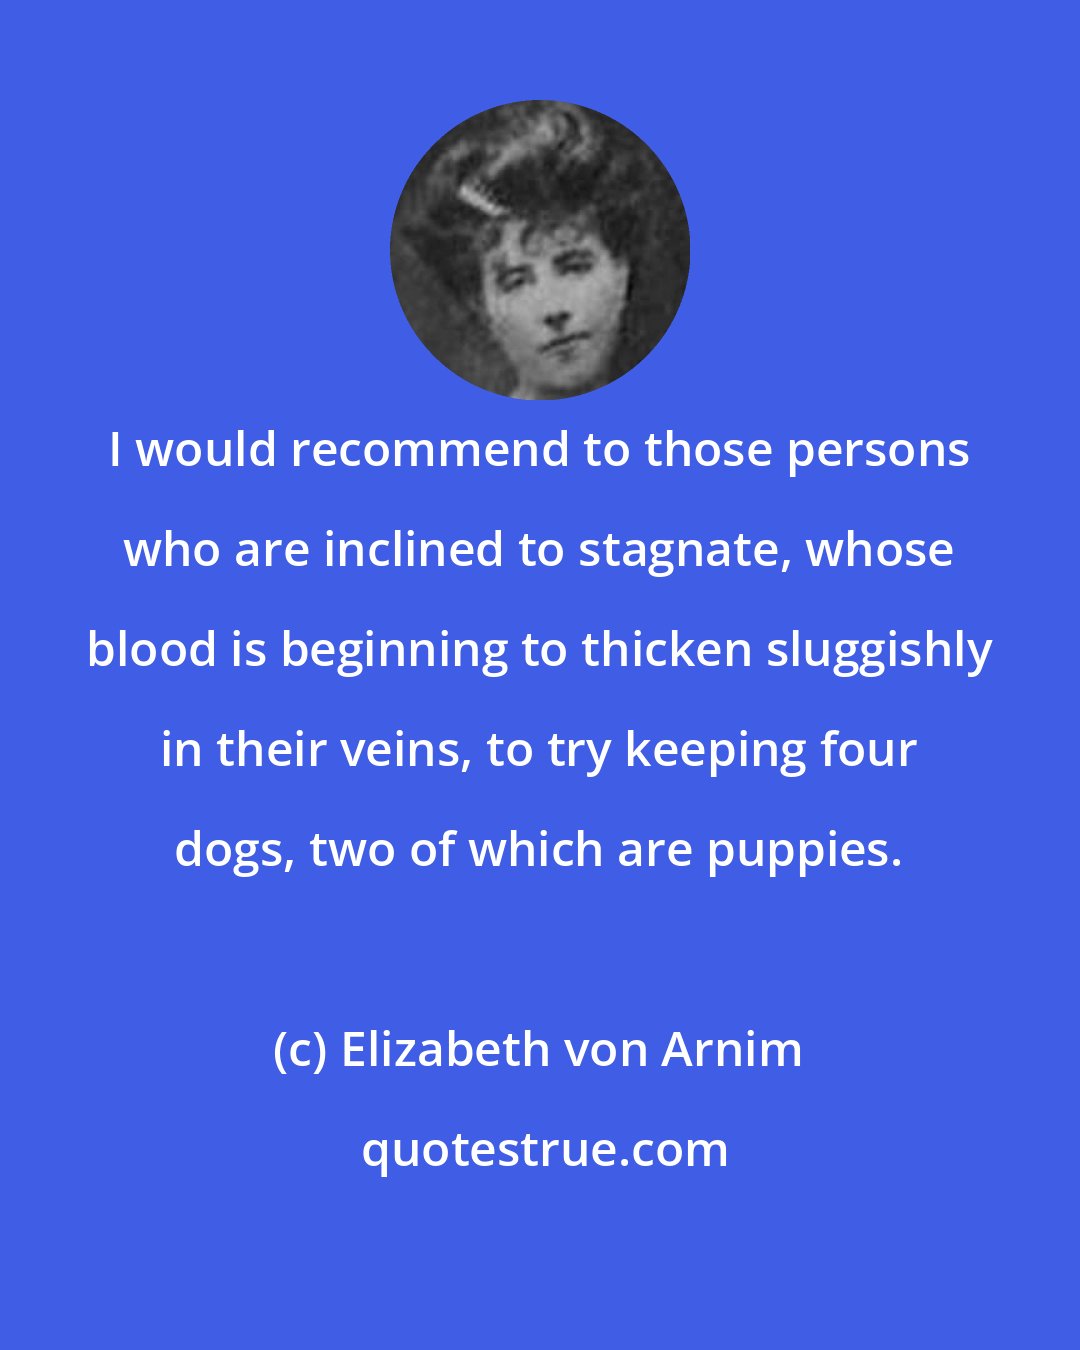 Elizabeth von Arnim: I would recommend to those persons who are inclined to stagnate, whose blood is beginning to thicken sluggishly in their veins, to try keeping four dogs, two of which are puppies.